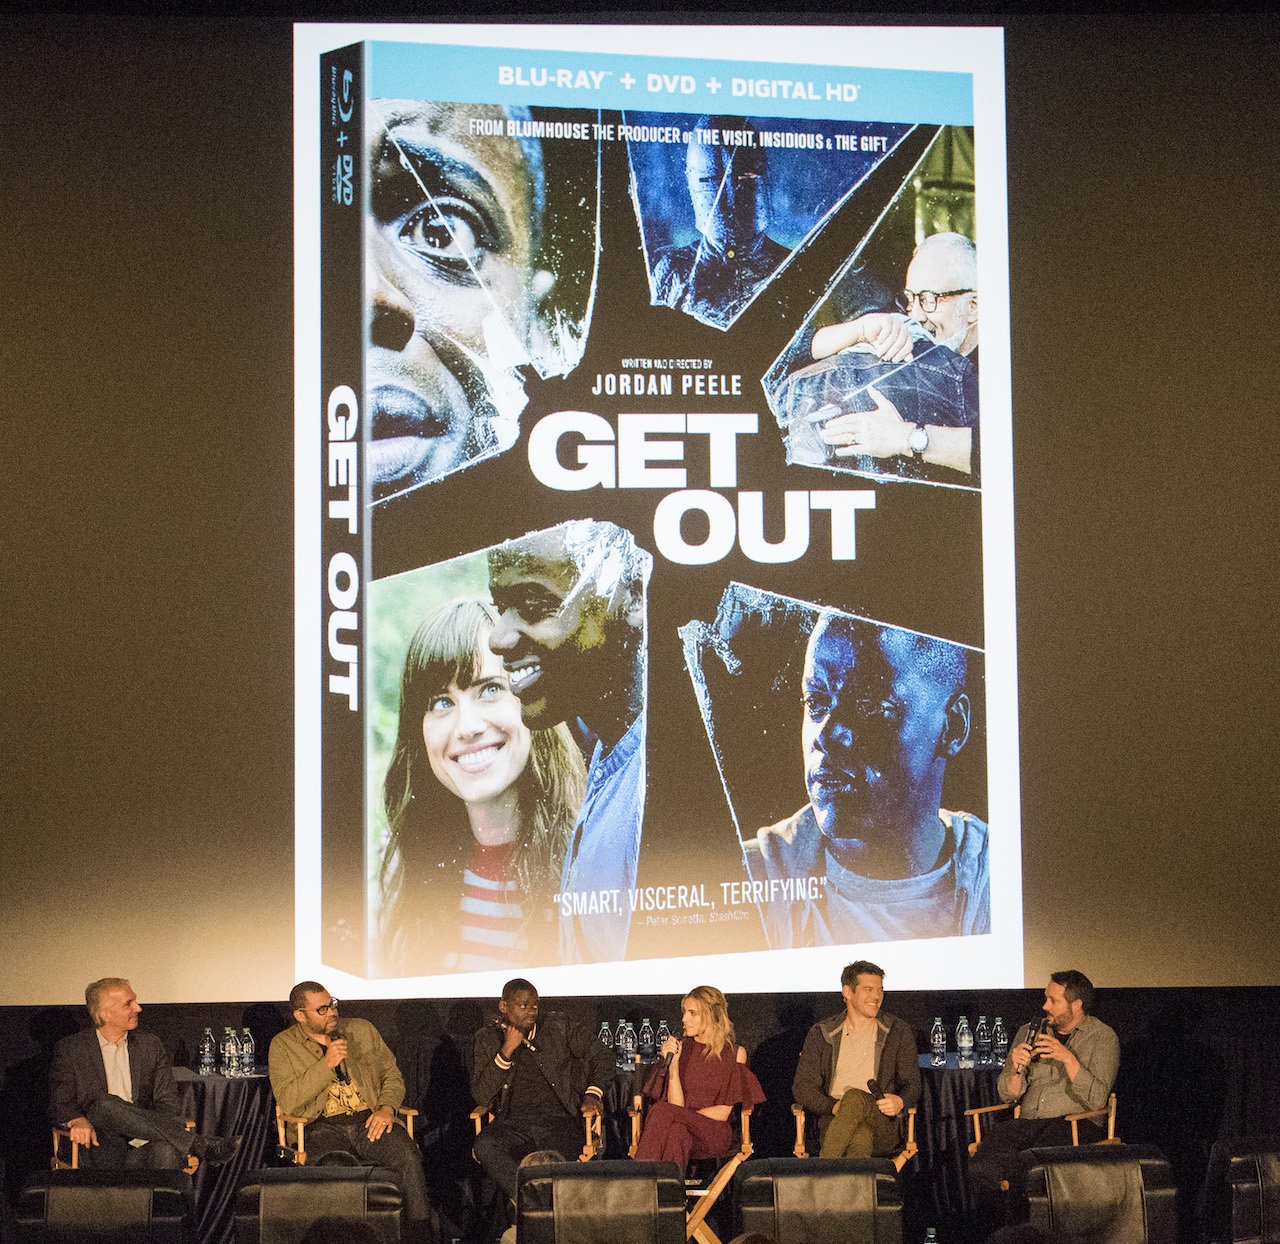 Quentin Tarantino Described How Jordan Peele Created the Best ‘Ahhhh’ Moment in ‘Get Out’